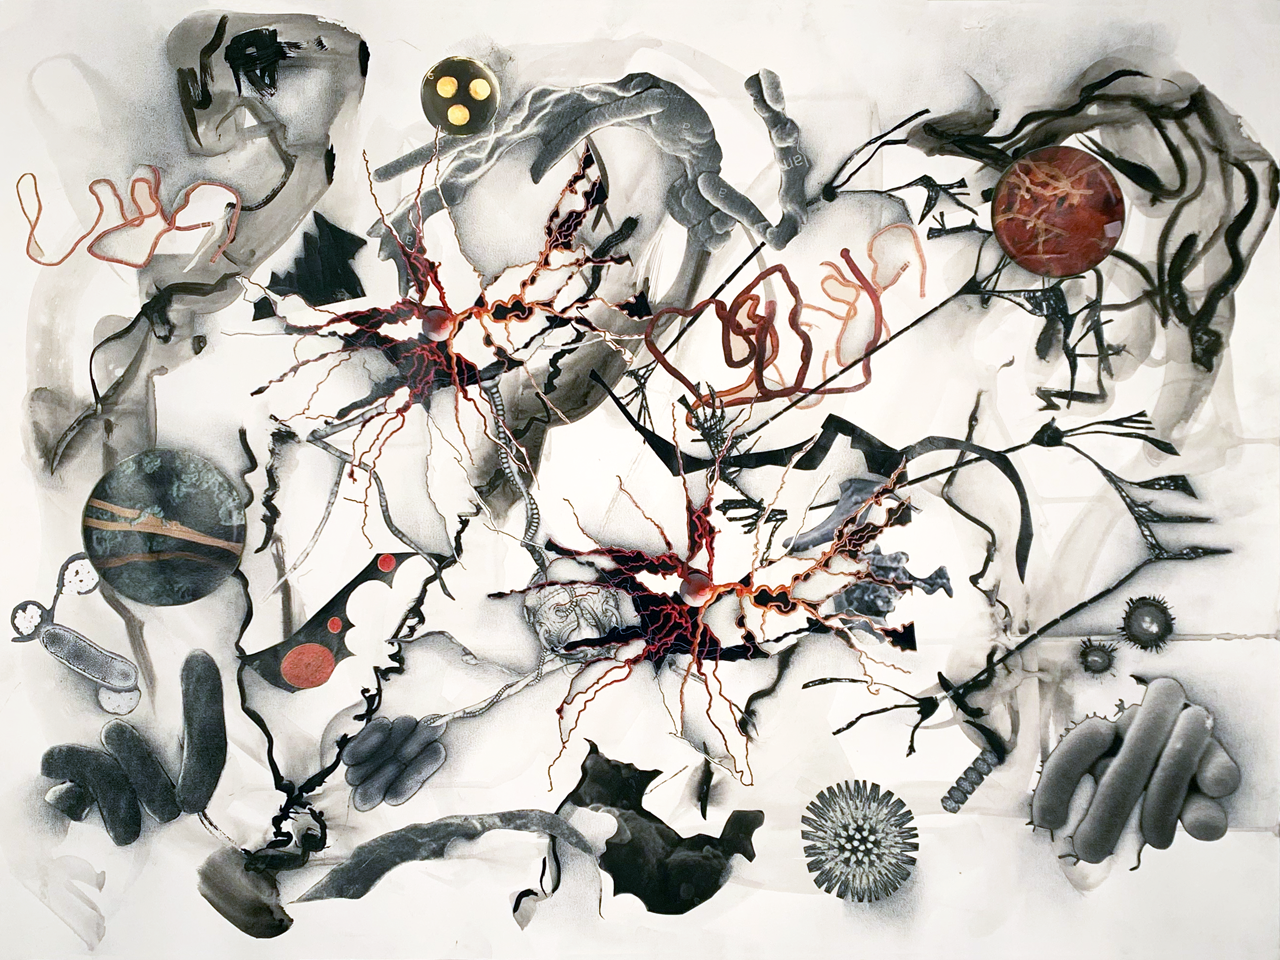   Brains 1416 , 2022, graphite, India ink, printer ink and paper on paper, 18"x24" 